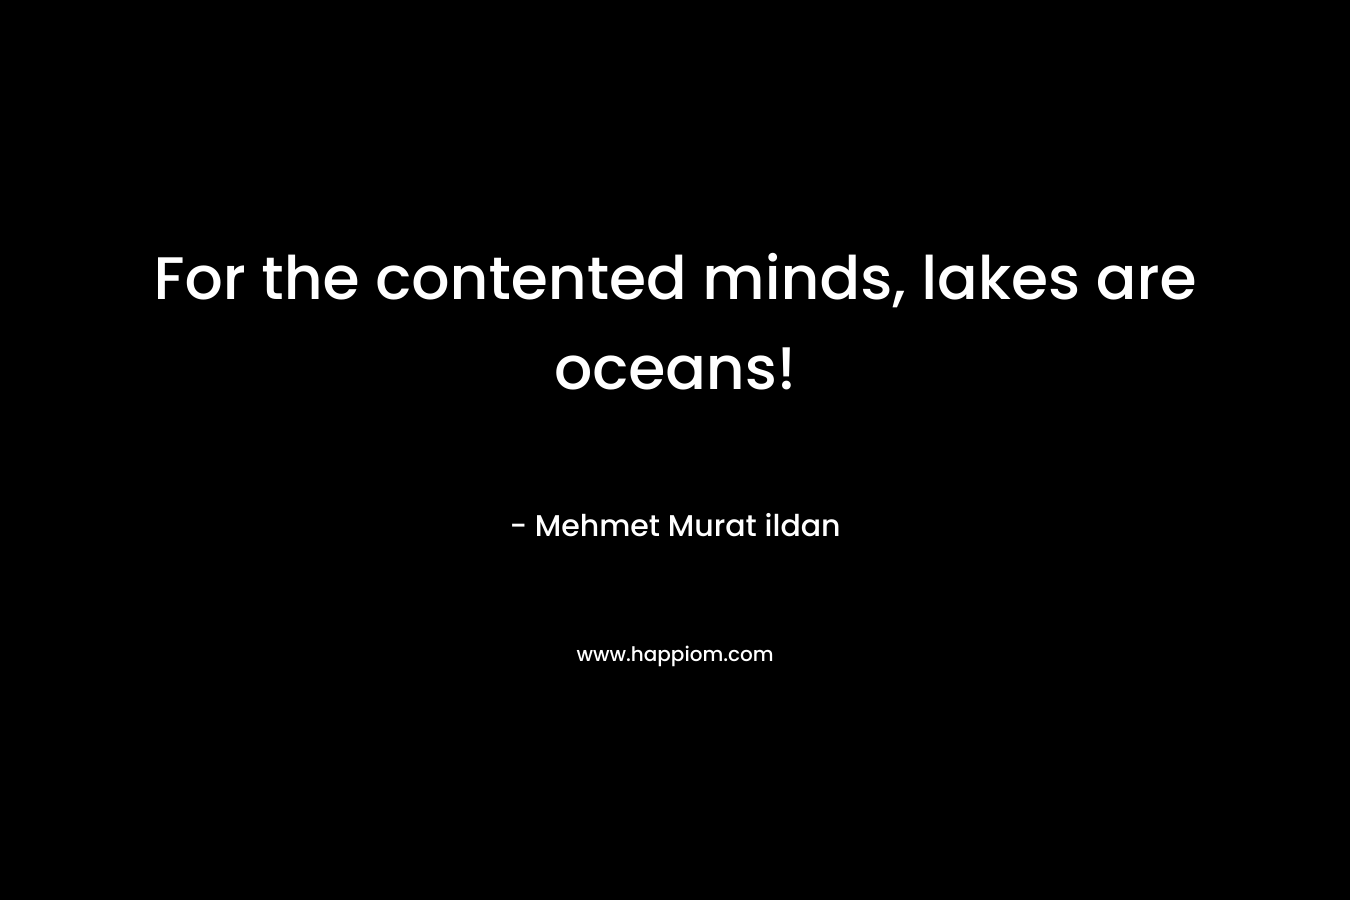 For the contented minds, lakes are oceans!